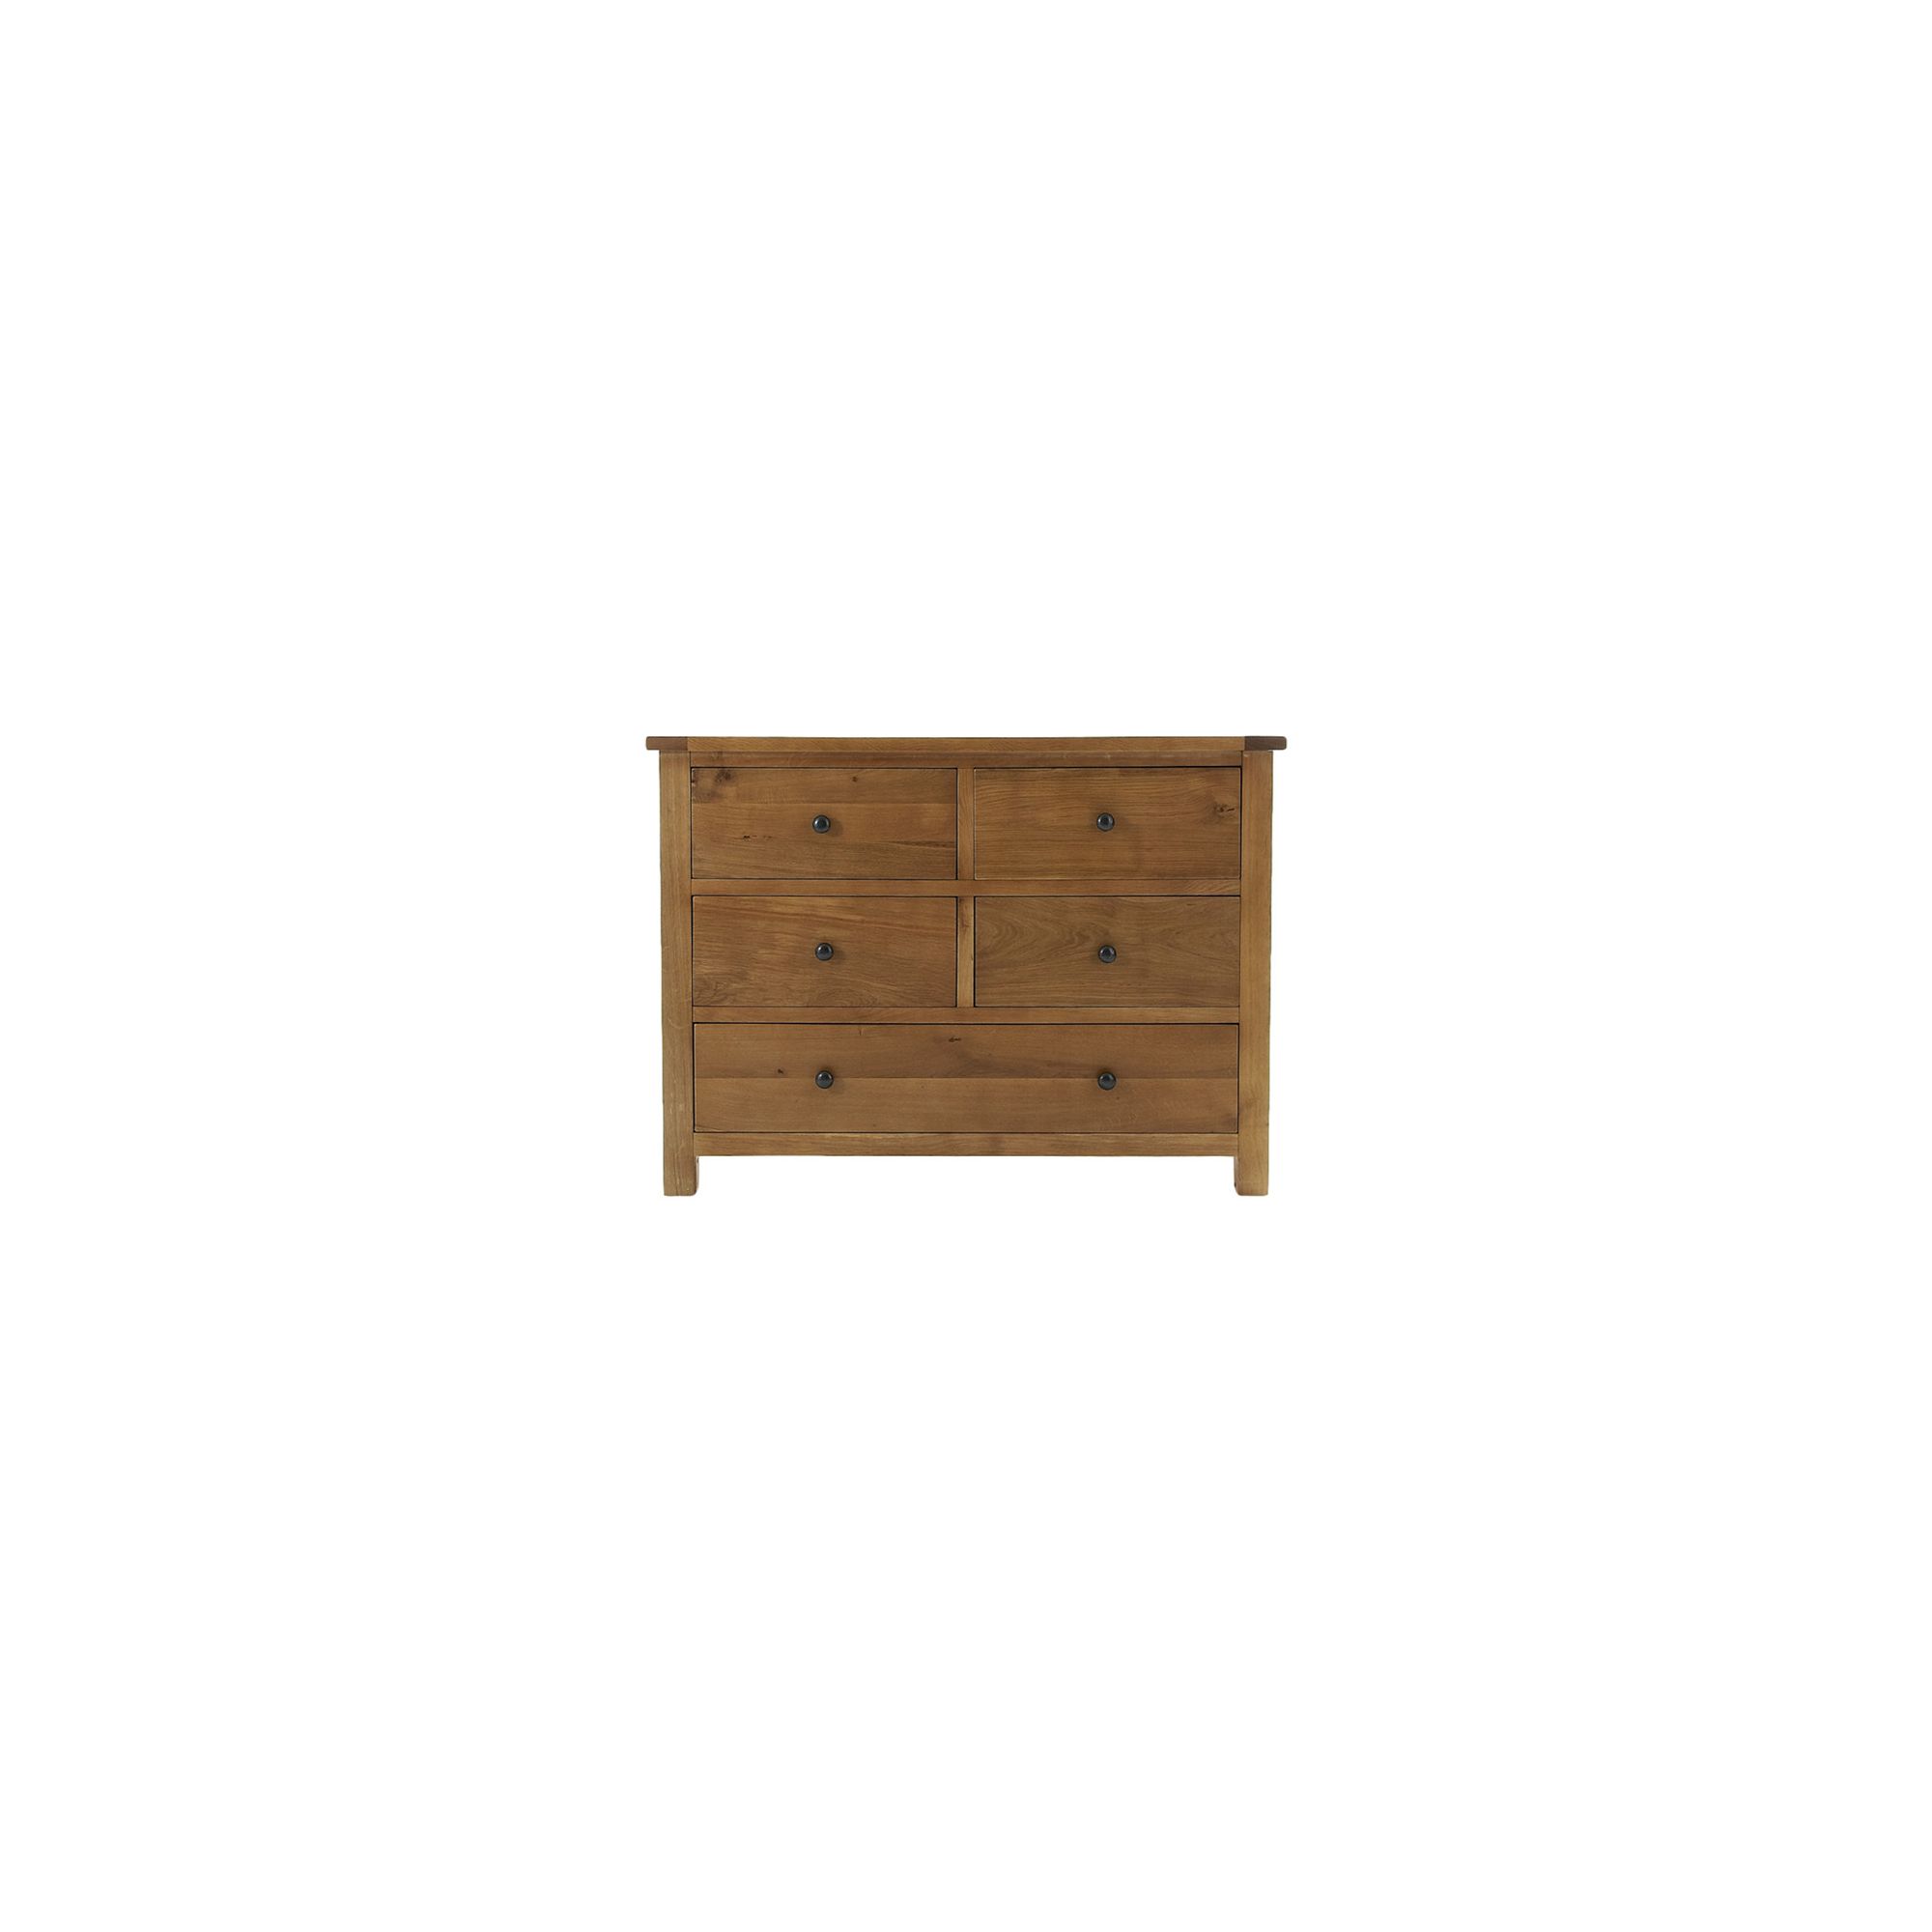 Thorndon Eden 4 Over 1 Drawer Chest in Warm Oak at Tesco Direct